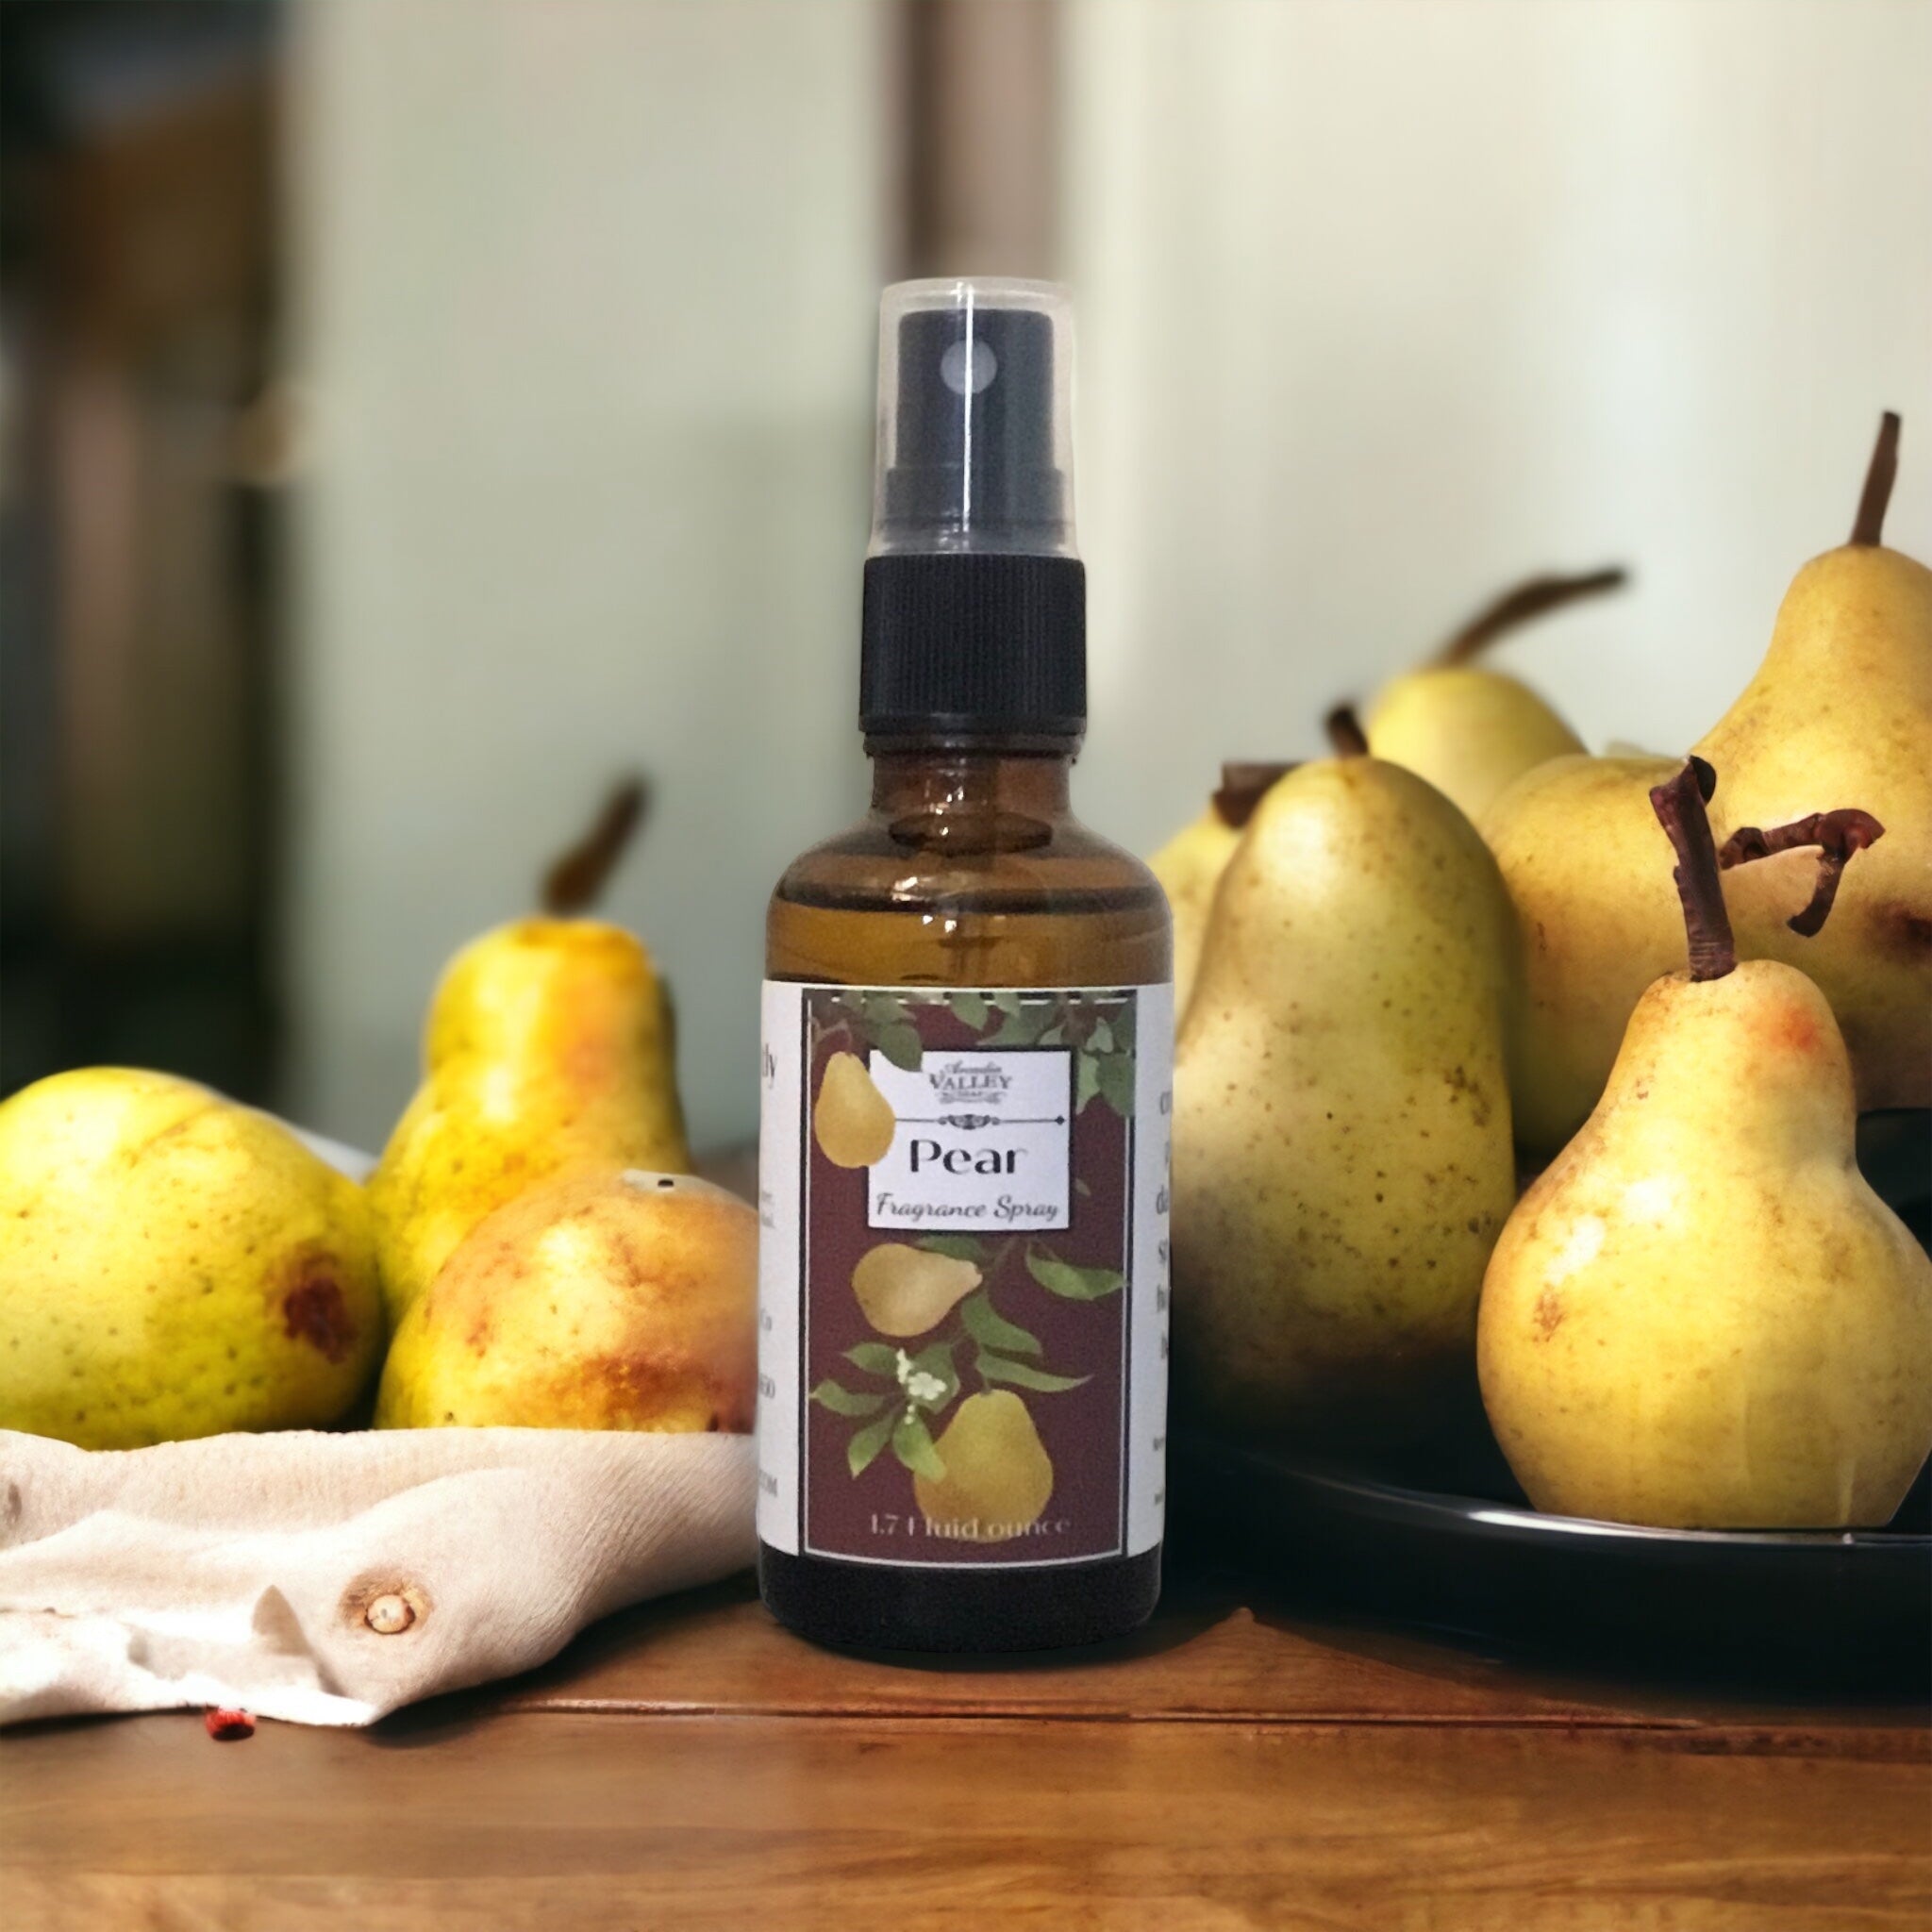 Amber glass bottle with black mist sprayer of Pear fragrance spray sitting on a wooden table with pears on display